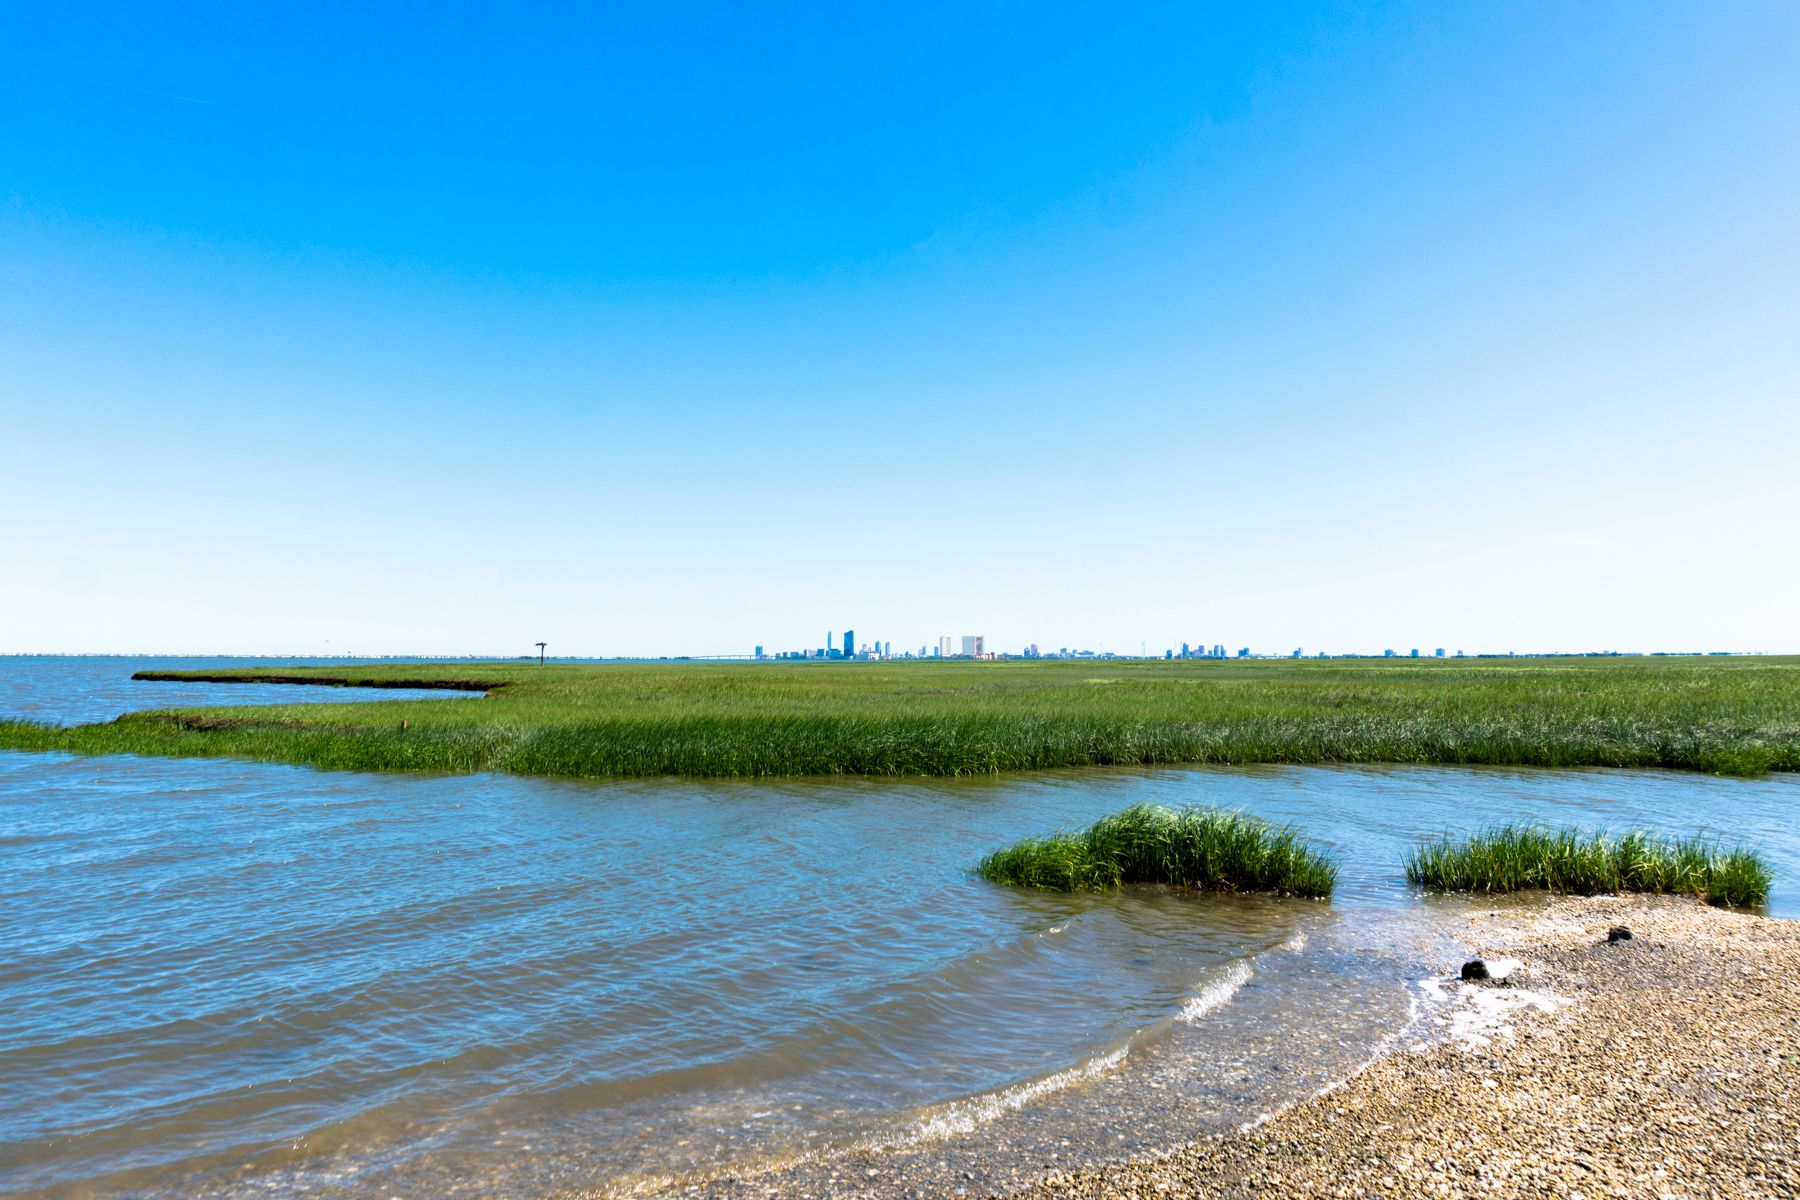 The Atlantic City skyline from the shores of Reeds Bay